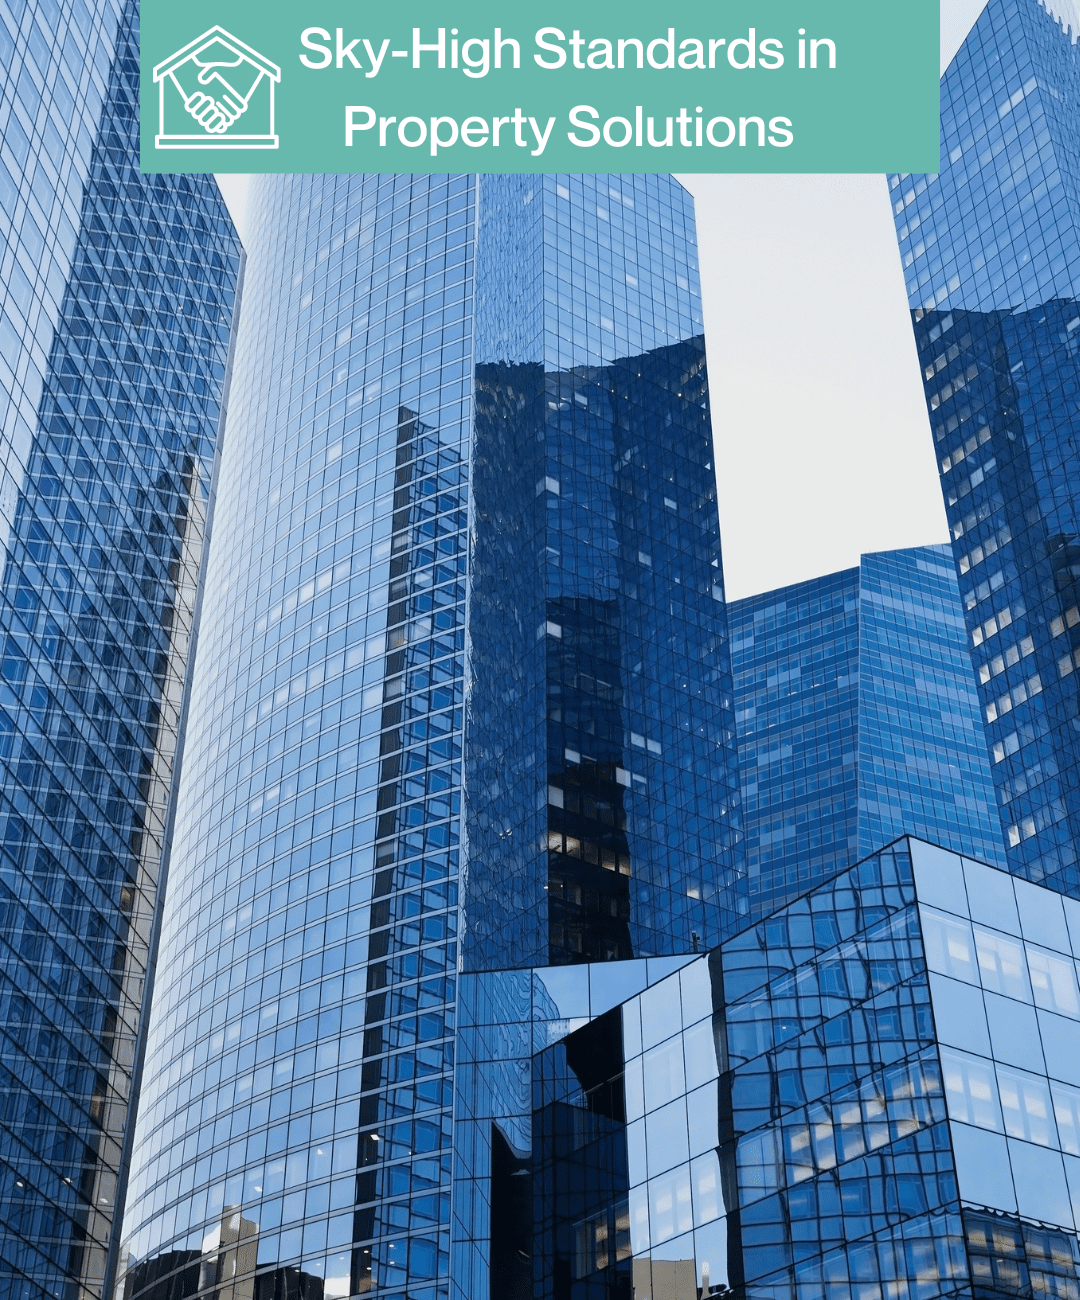 Modern skyscrapers symbolizing BDR’s high-standard property and estate solutions.